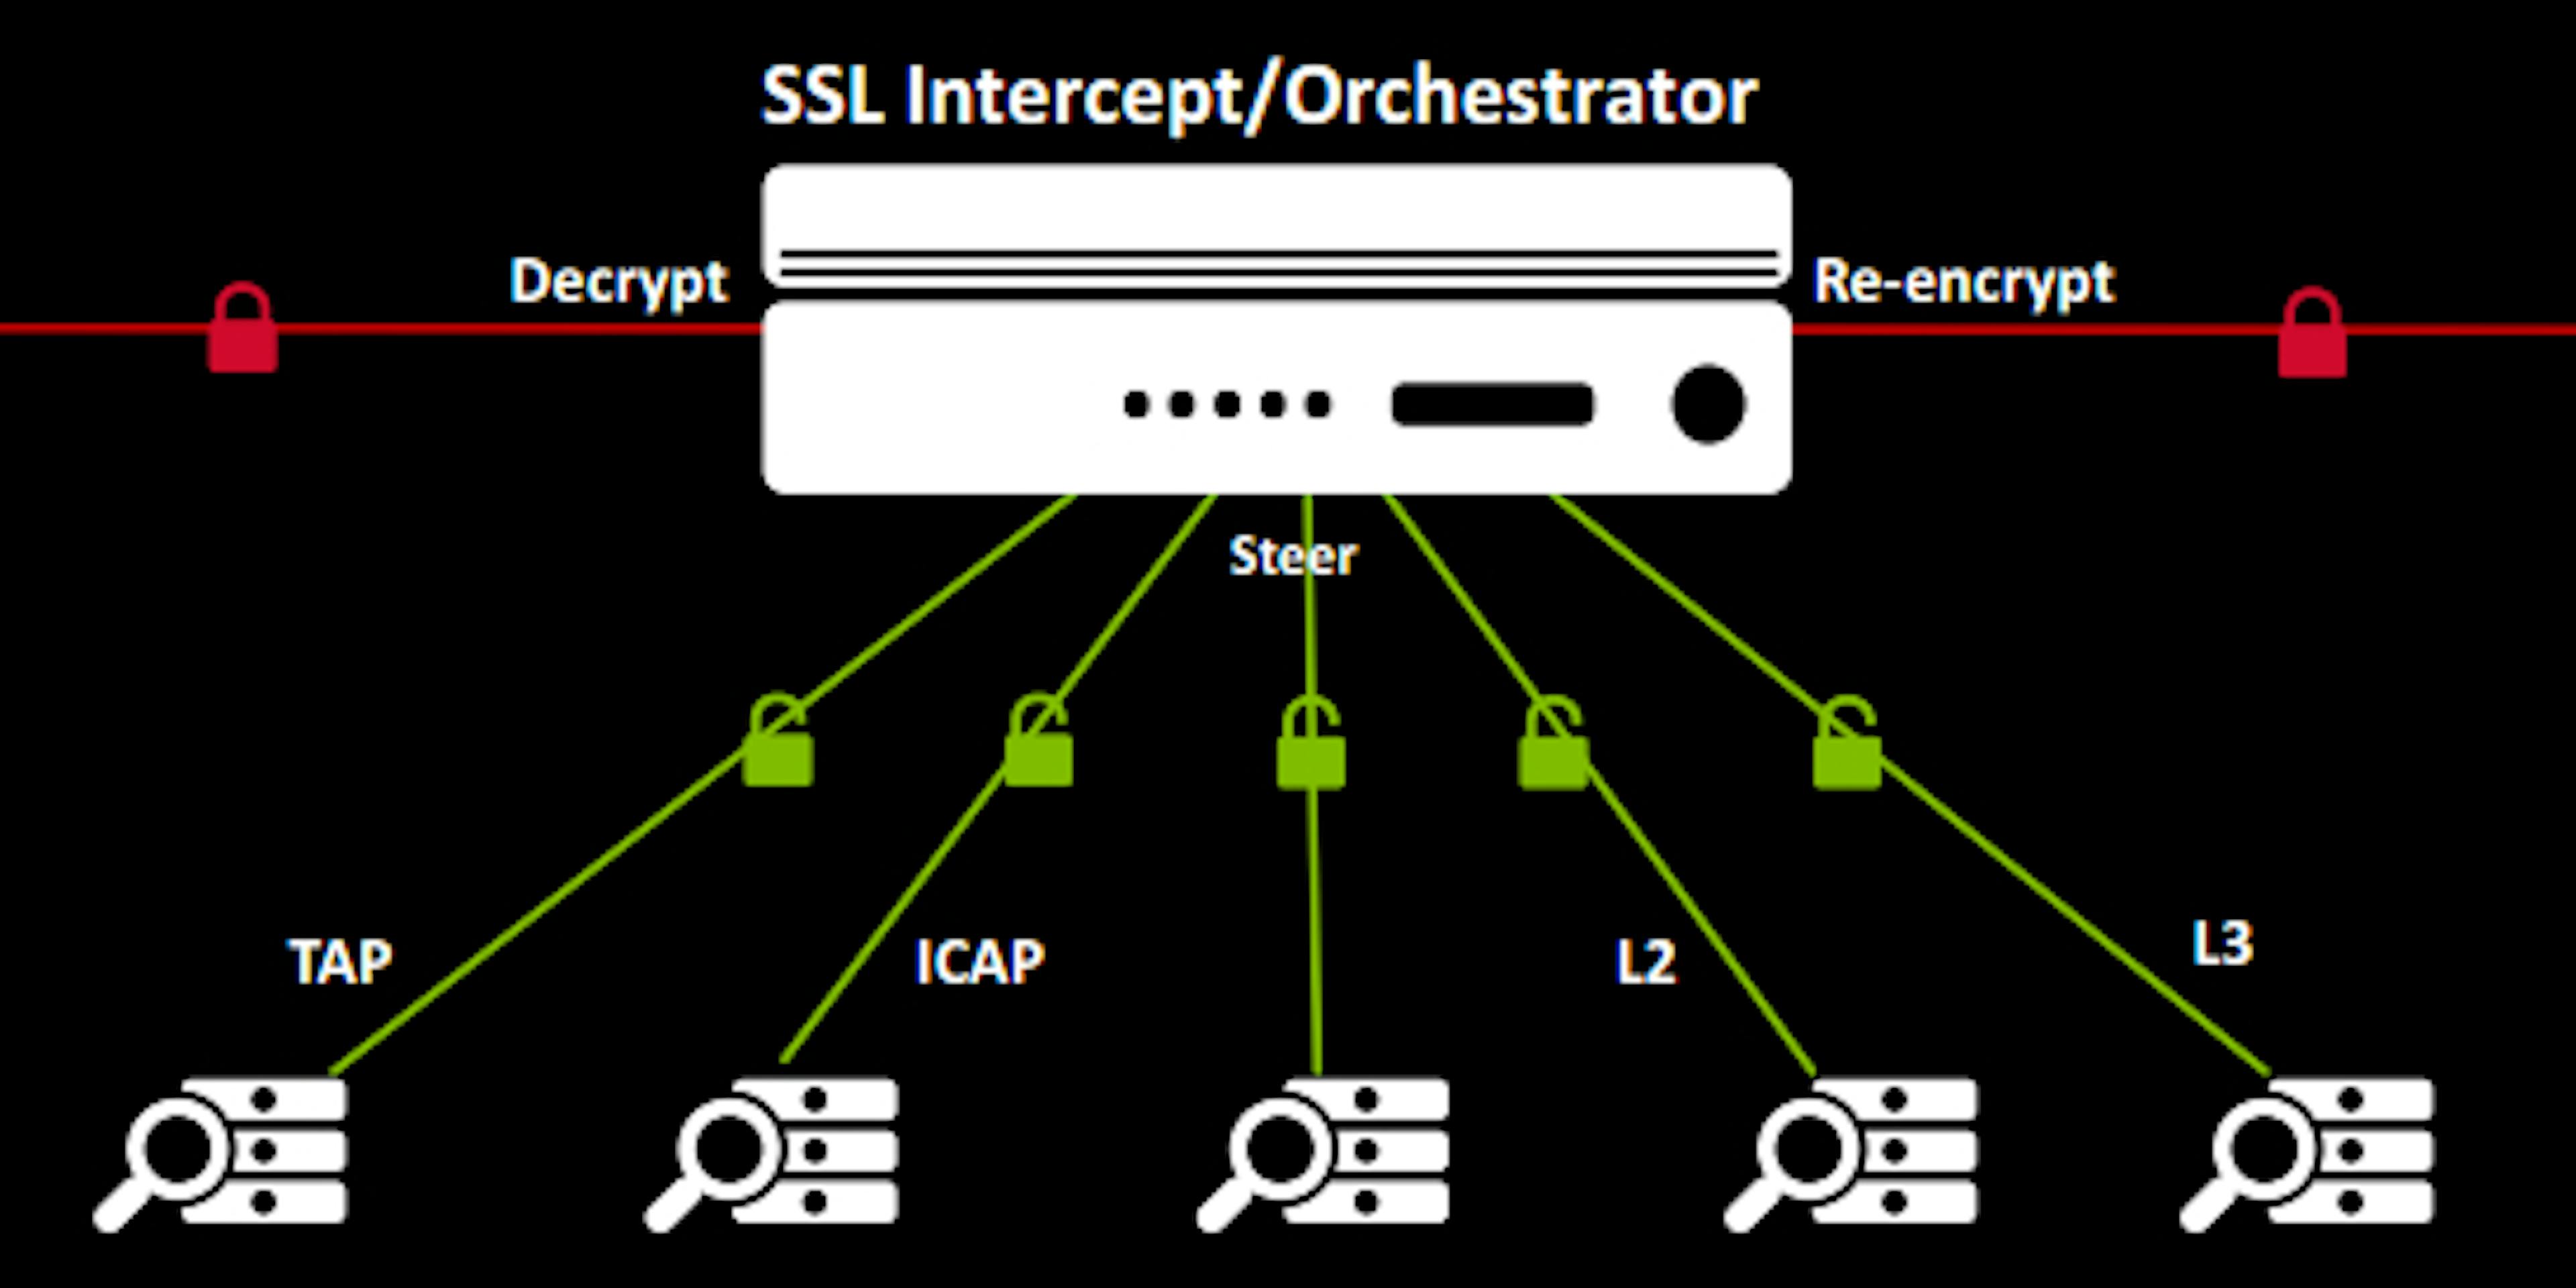 /ssl-certificates-and-some-other-prerequisites-for-installing-orchestrator-qm1kg3zia feature image